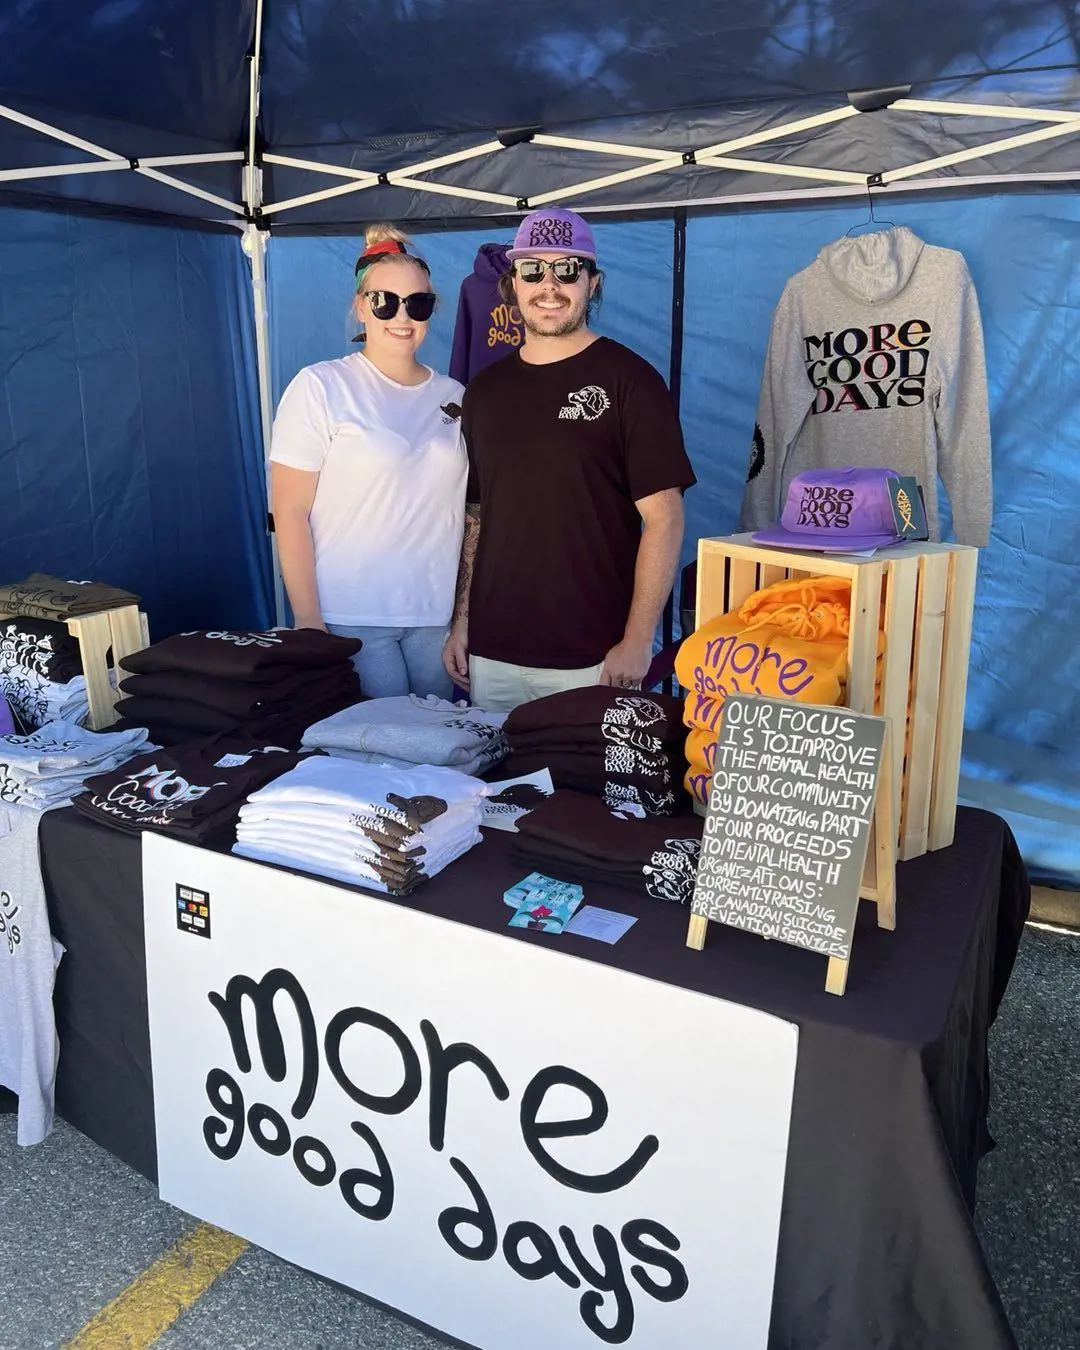 More Good Days Clothing is an initiative by Kaitlin Hrudey. The company's main focus is to improve the community's mental health. 